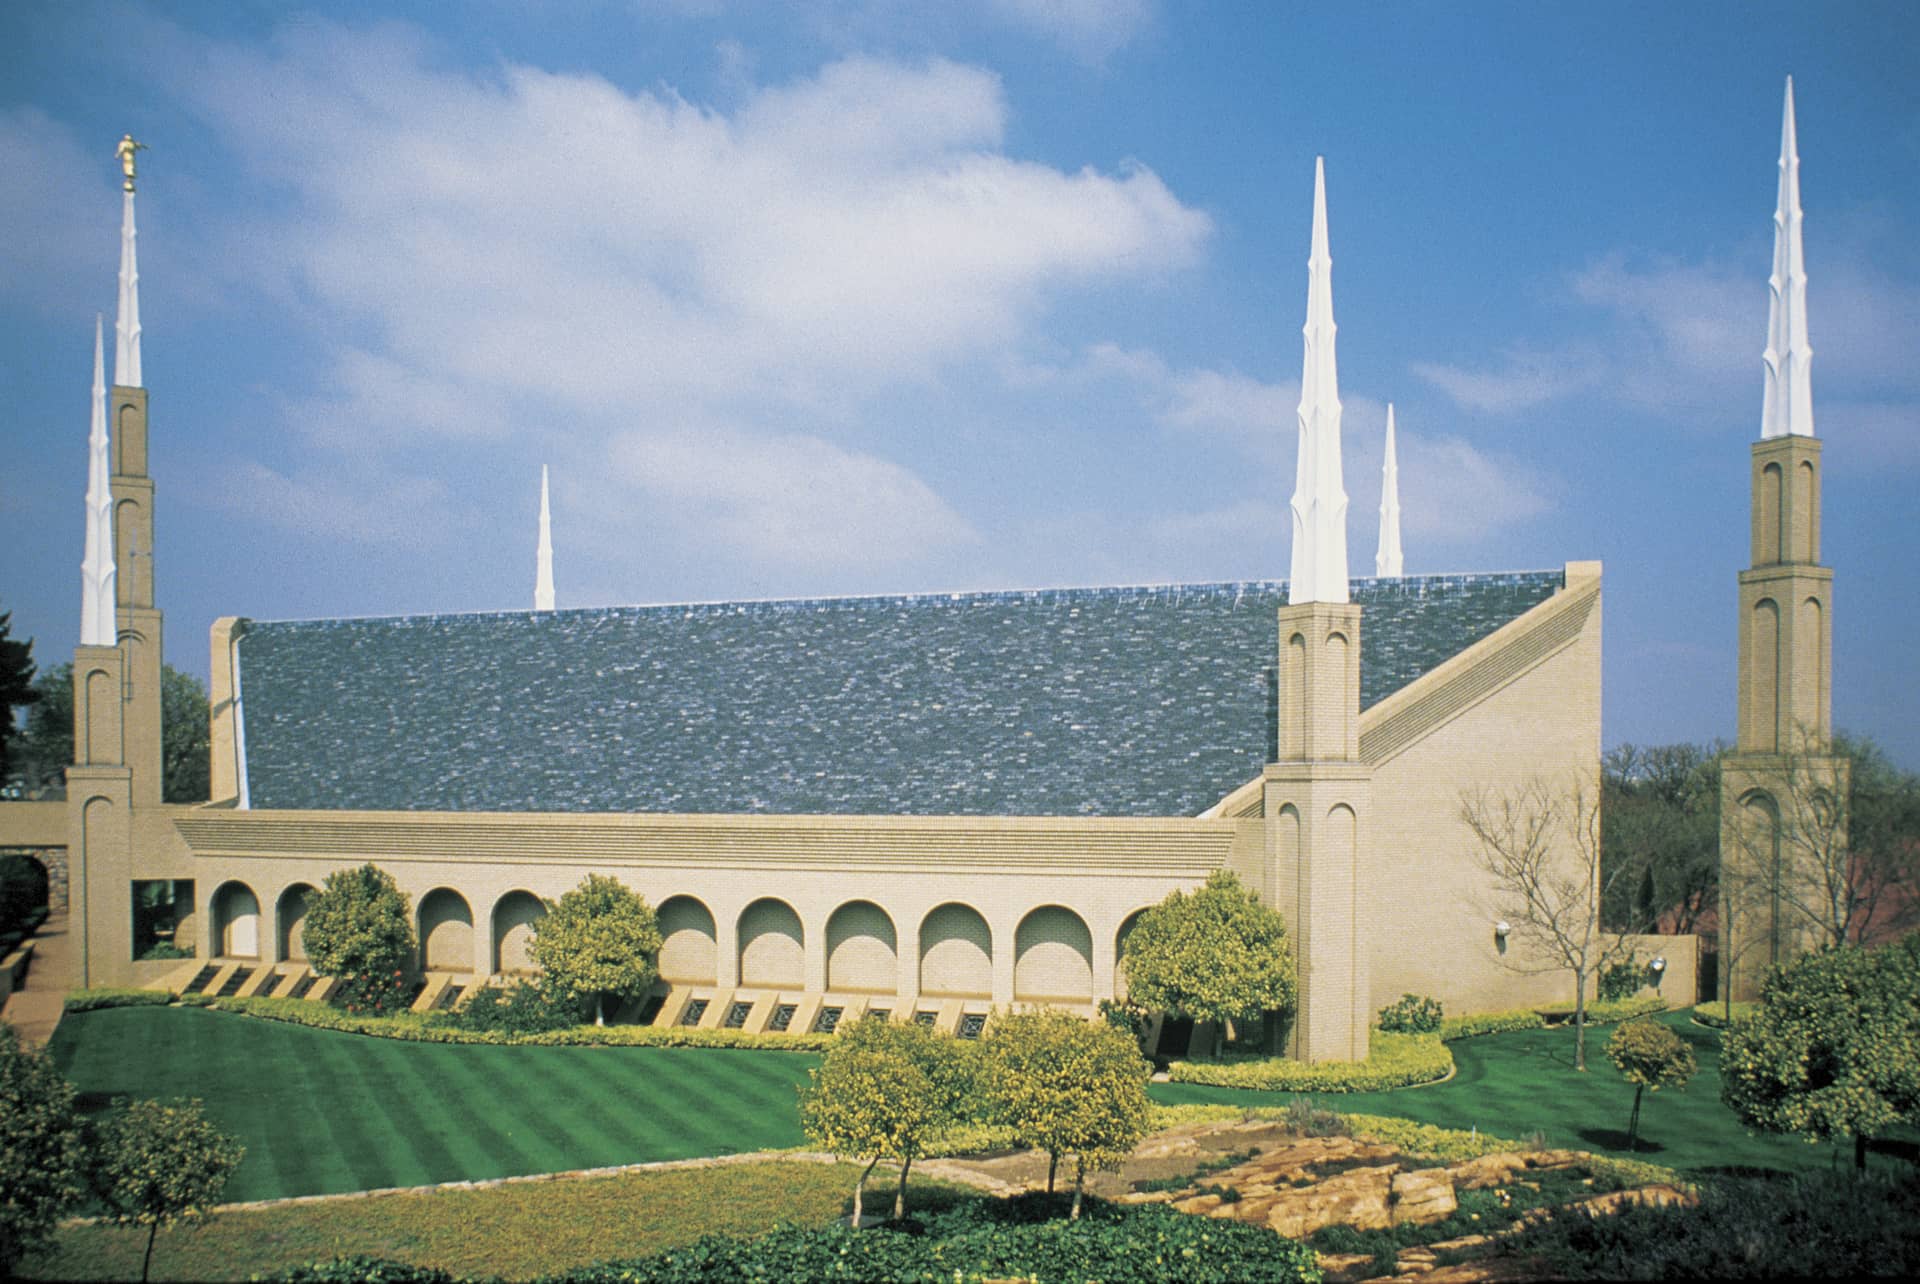 The Johannesburg South Africa Temple, a white building with a peaked blue roof and six tall, detached spires around the exterior.